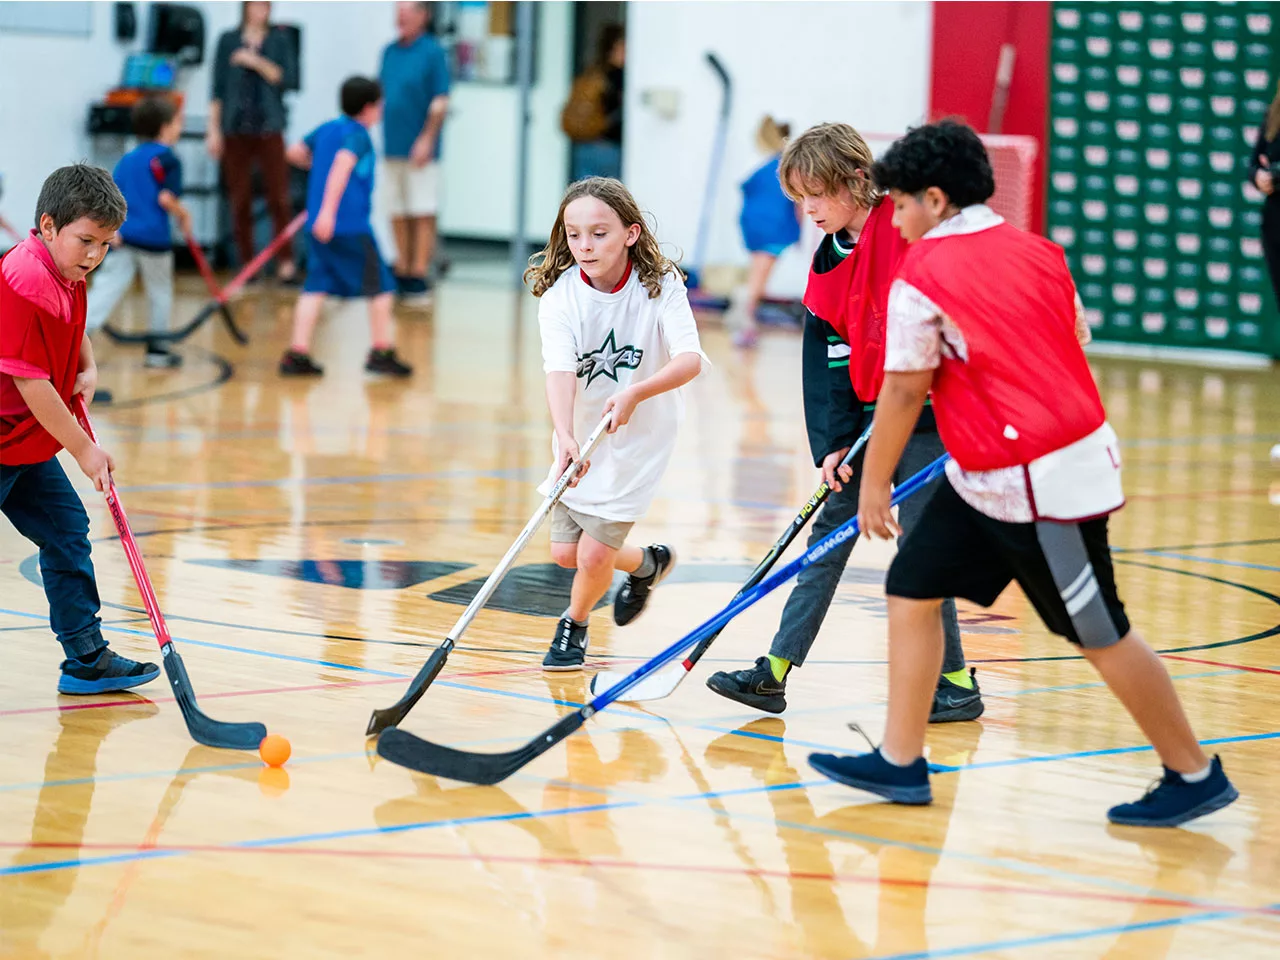 A group of children play a game of indoor hockey on a hardwood floor.